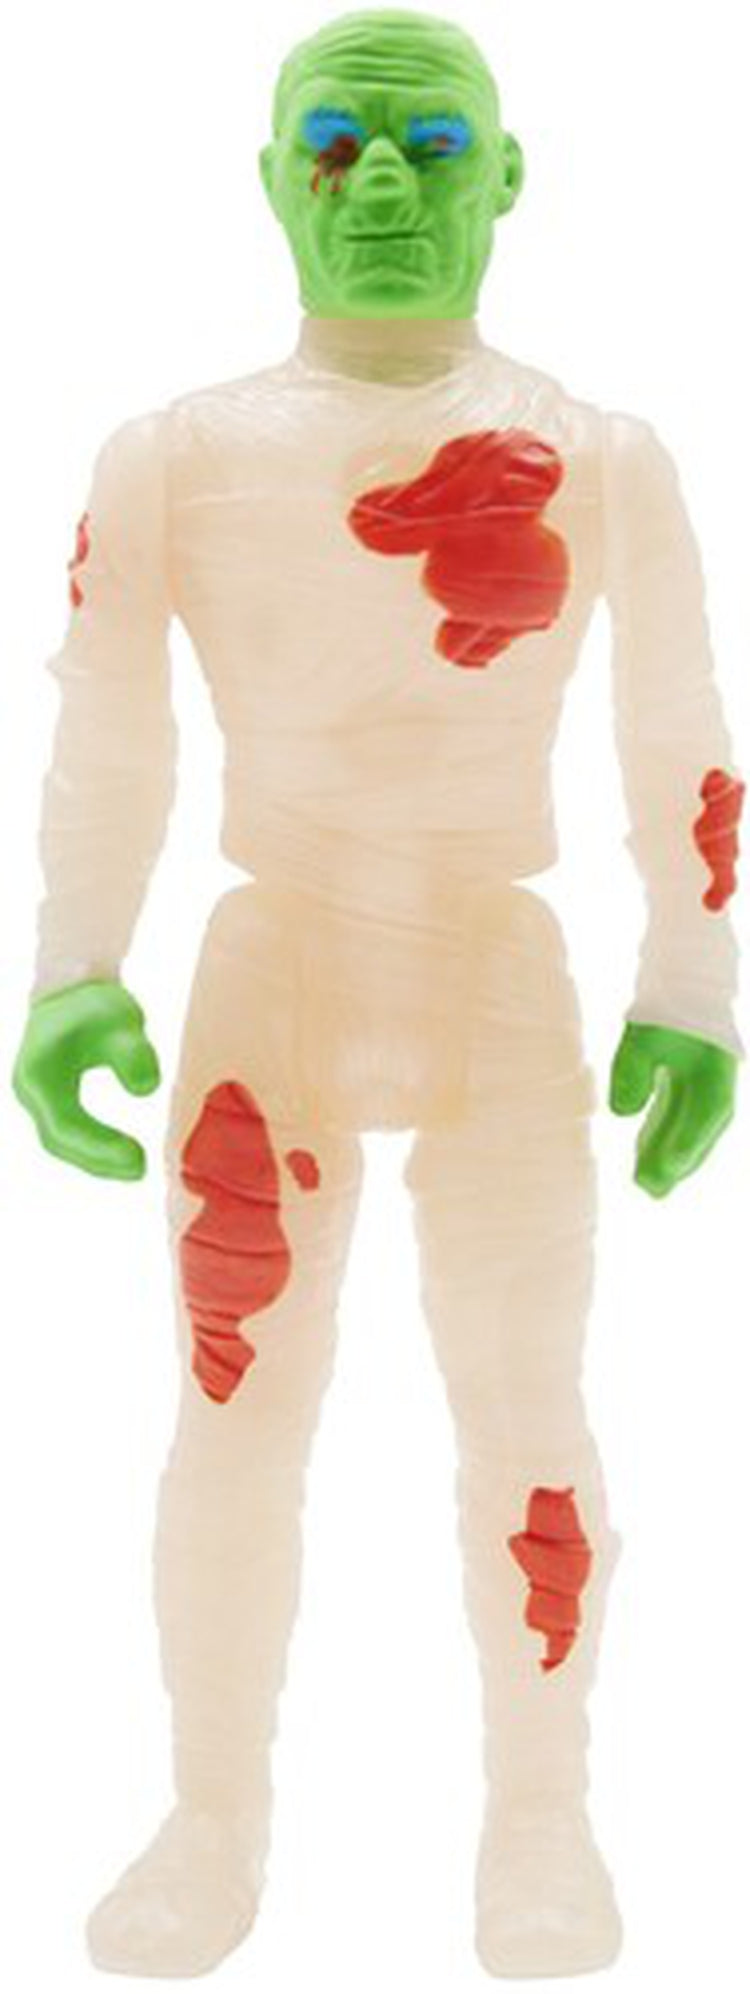 Super7 - Universal Monsters ReAction Figure - The Mummy (Glow-In-The-Dark Costume Colors)